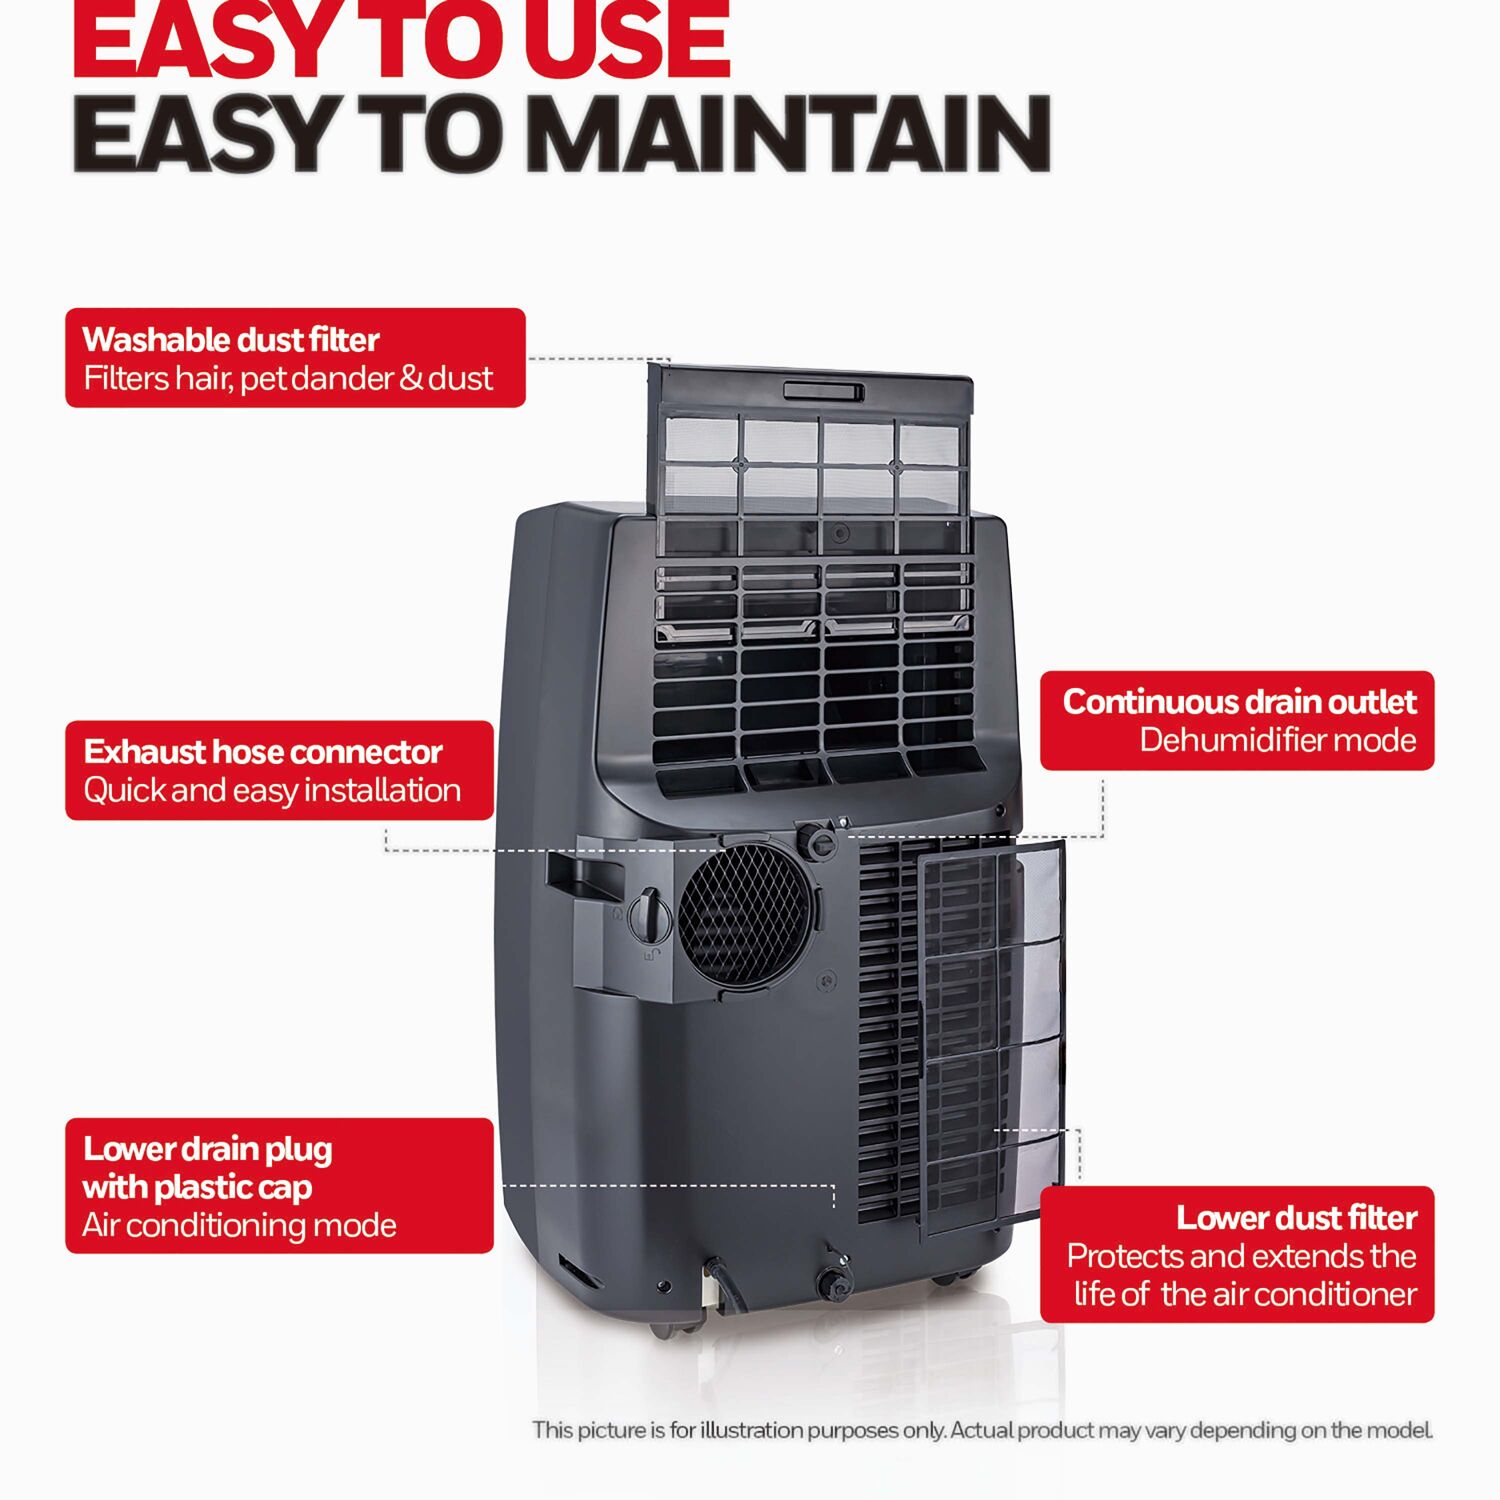 Honeywell 14,000 BTU Portable Air Conditioner, Dehumidifier and Fan - image 3 of 11